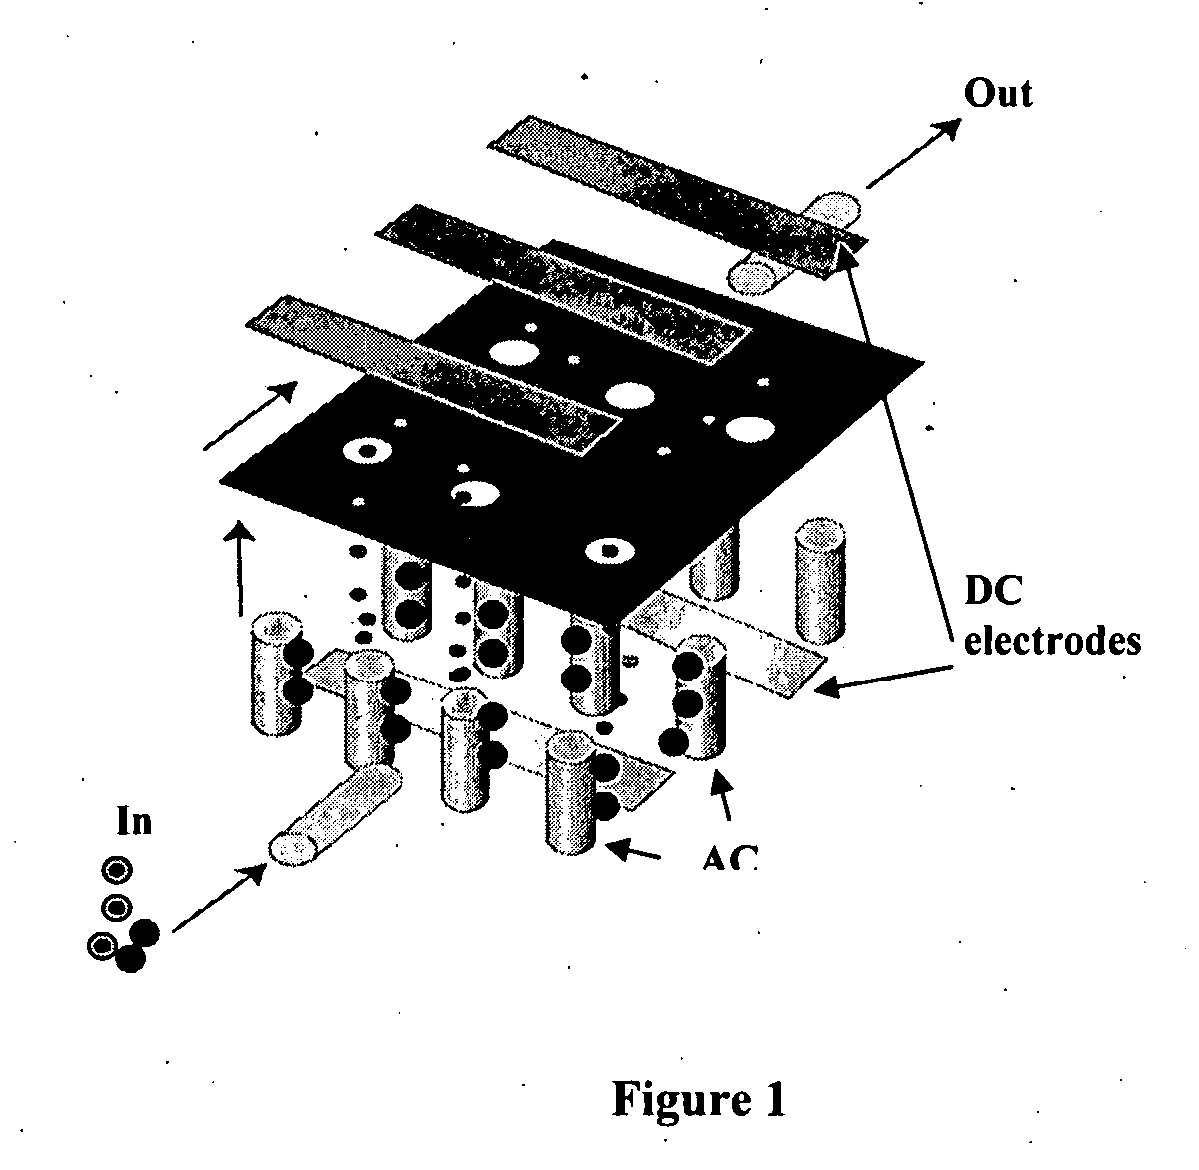 Three dimensional dielectrophoretic separator and methods of use